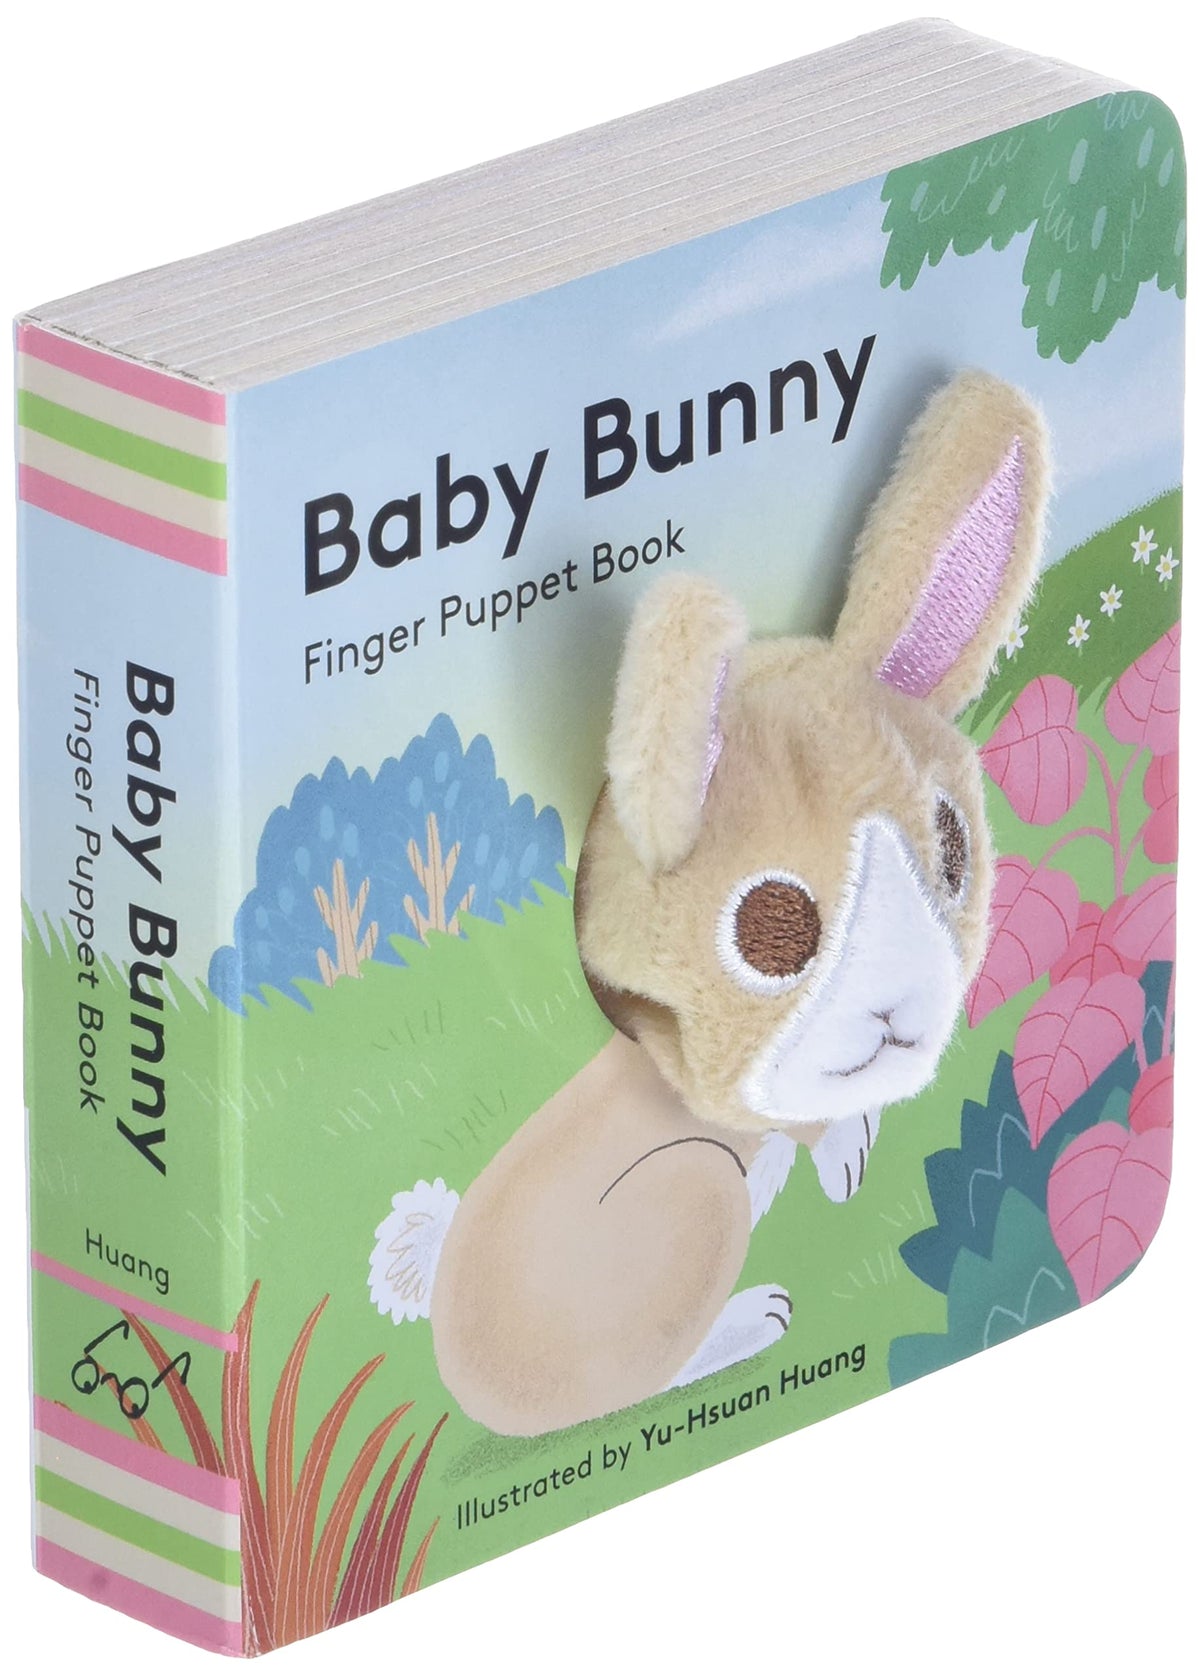 Baby Bunny: Finger Puppet Book Cover